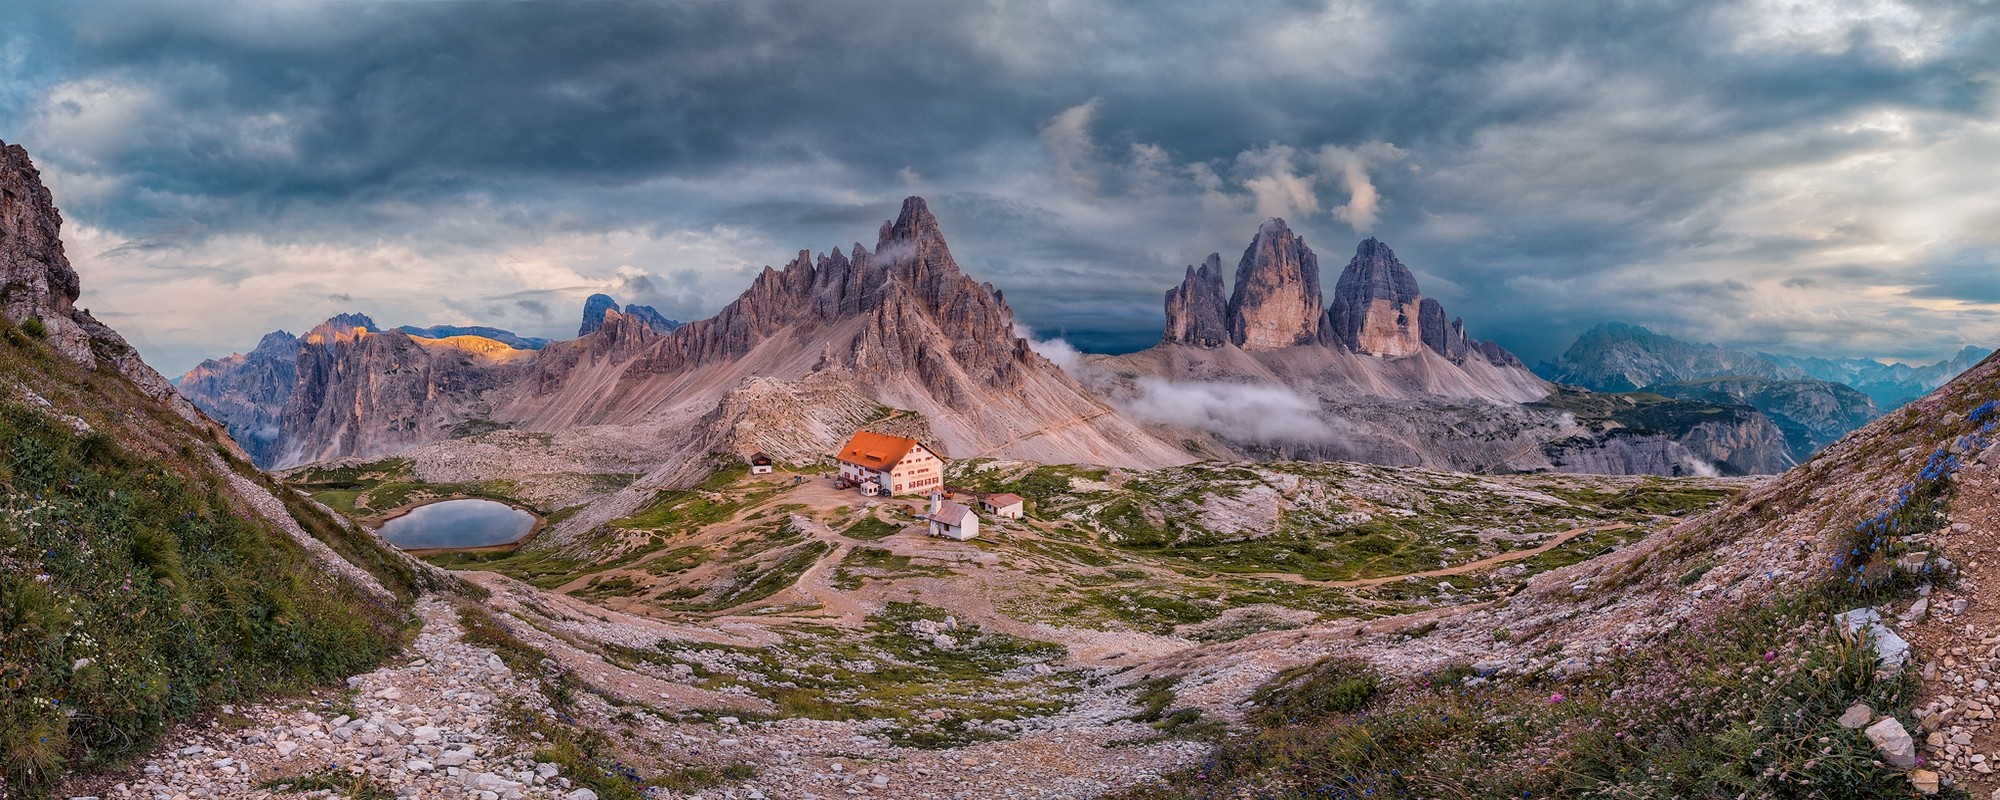 Nature Landscape Panoramas Mountains Lake Wildflowers Alps Italy Clouds Summer Hotel Cabin 2000x800